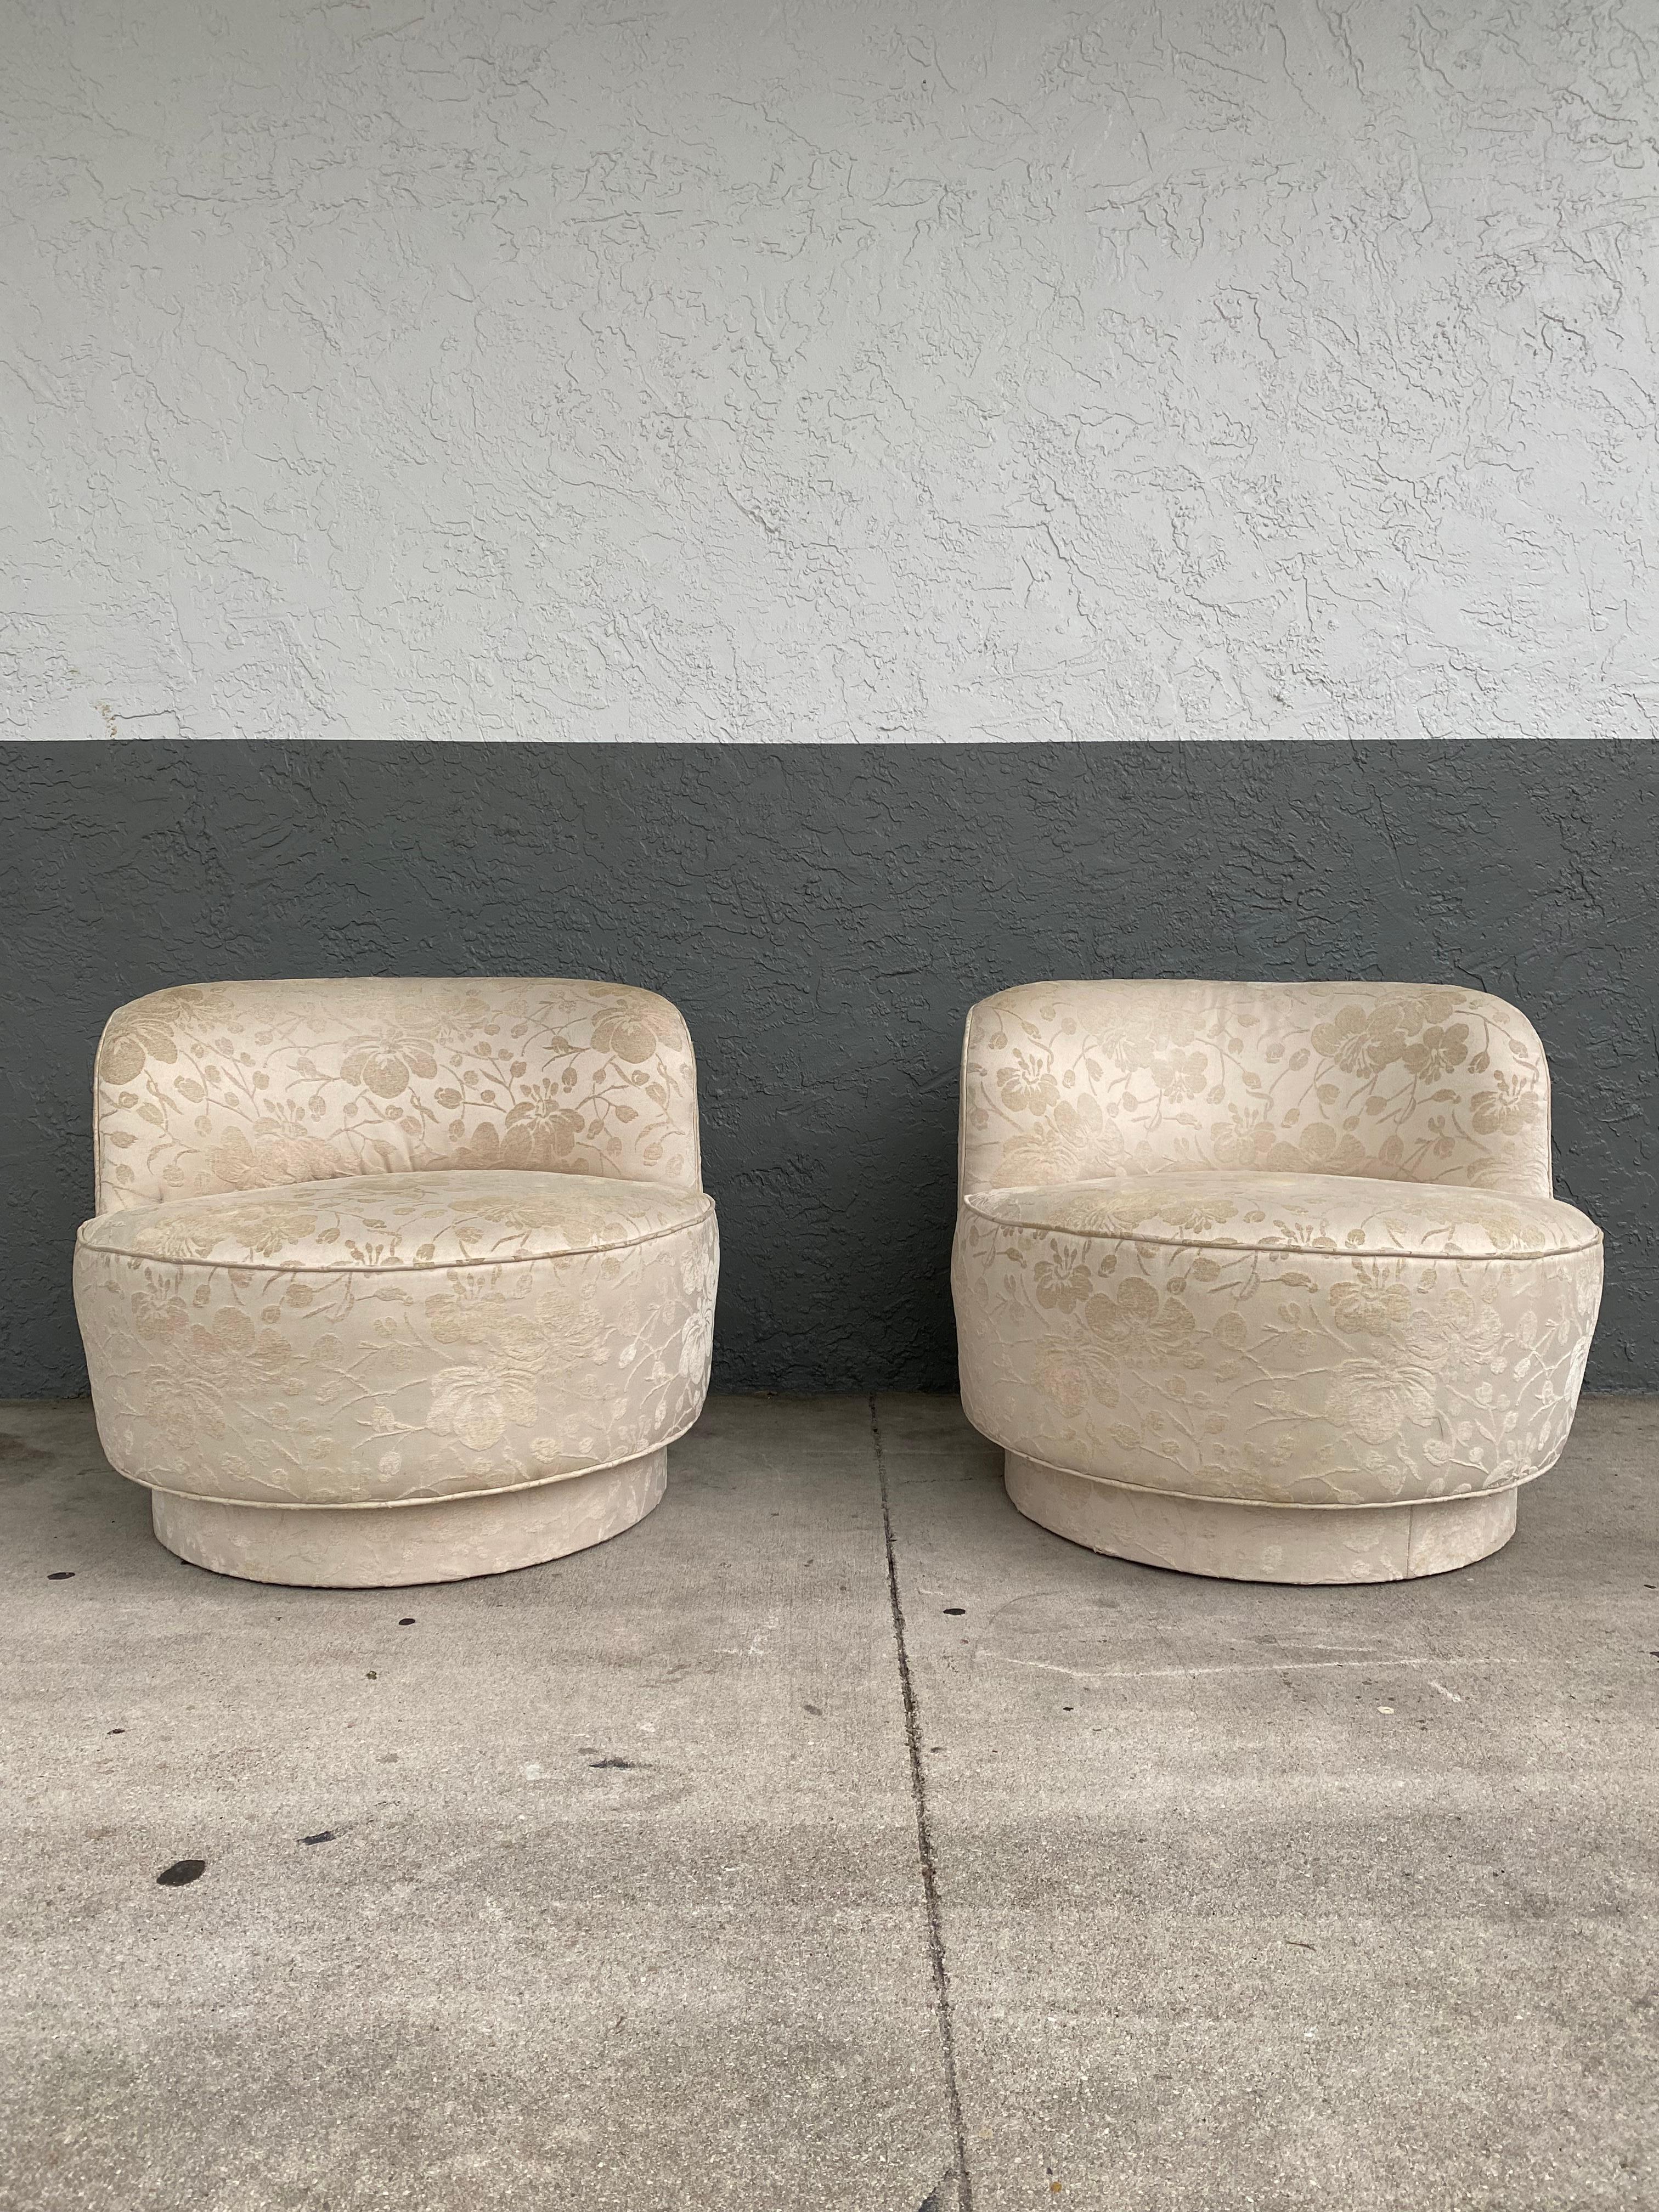 Post-Modern 1980s Preview Embroidered Floral Sculptural Curved Swivel Chairs, Set of 2 For Sale